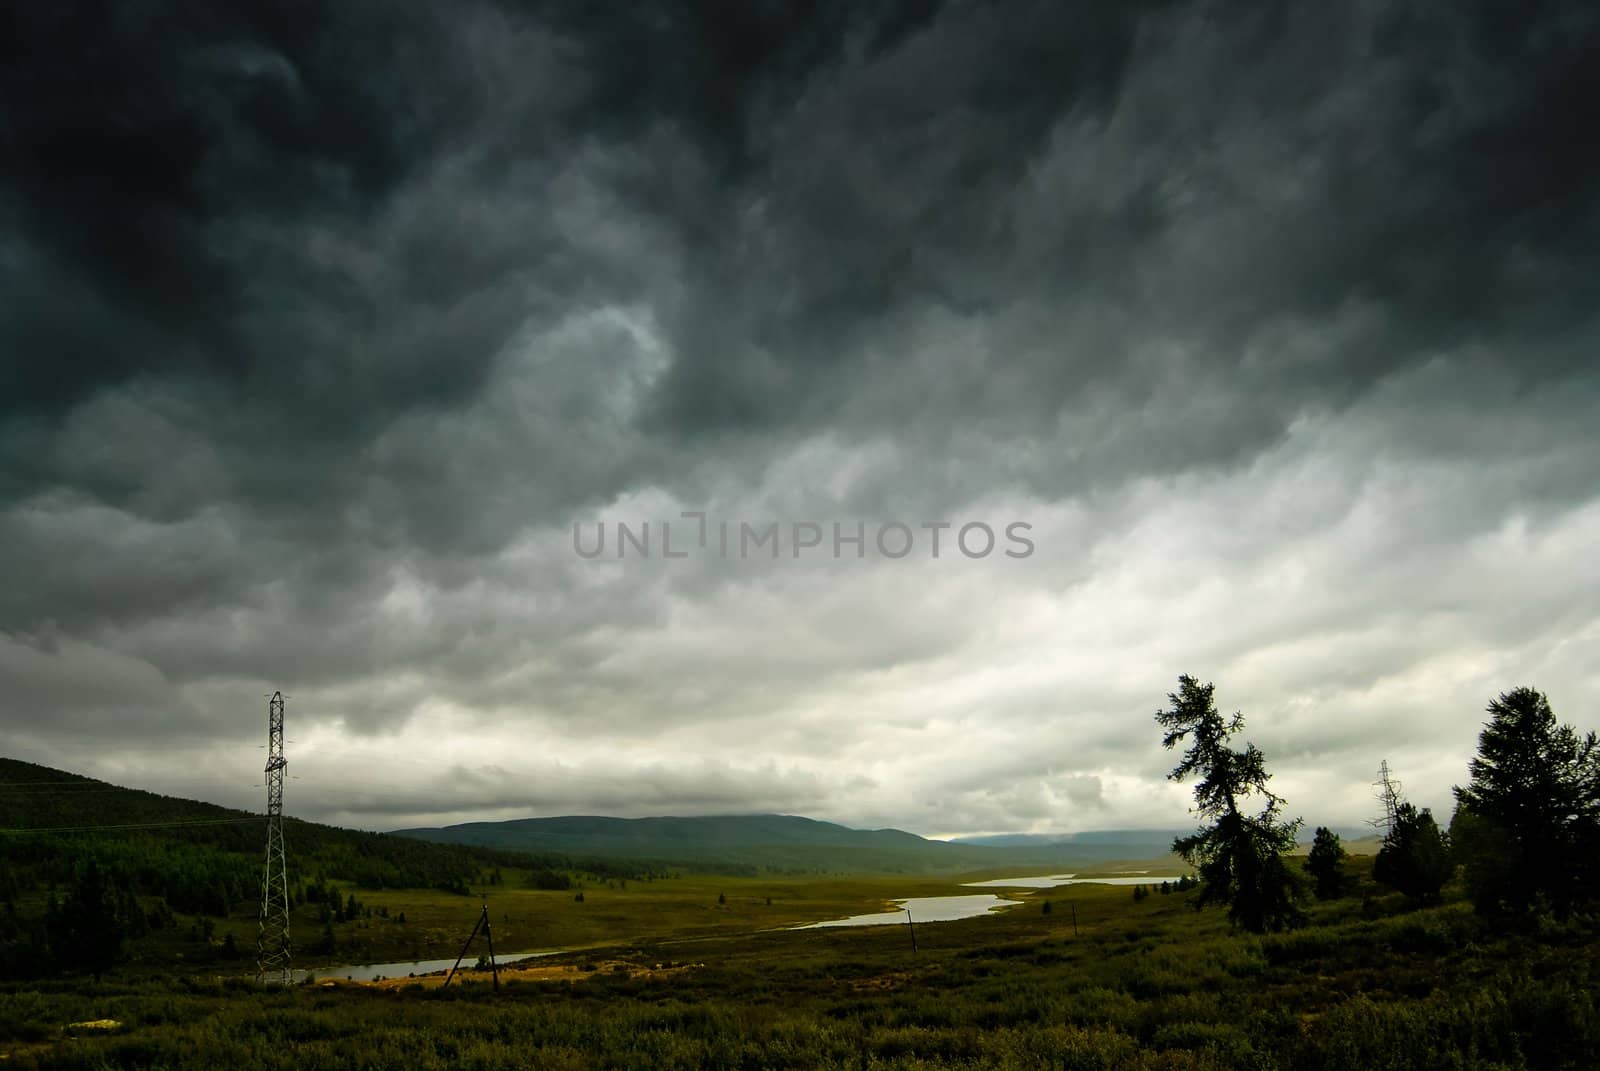 Black stormy sky in the rain in the mountains. Altai. Russia